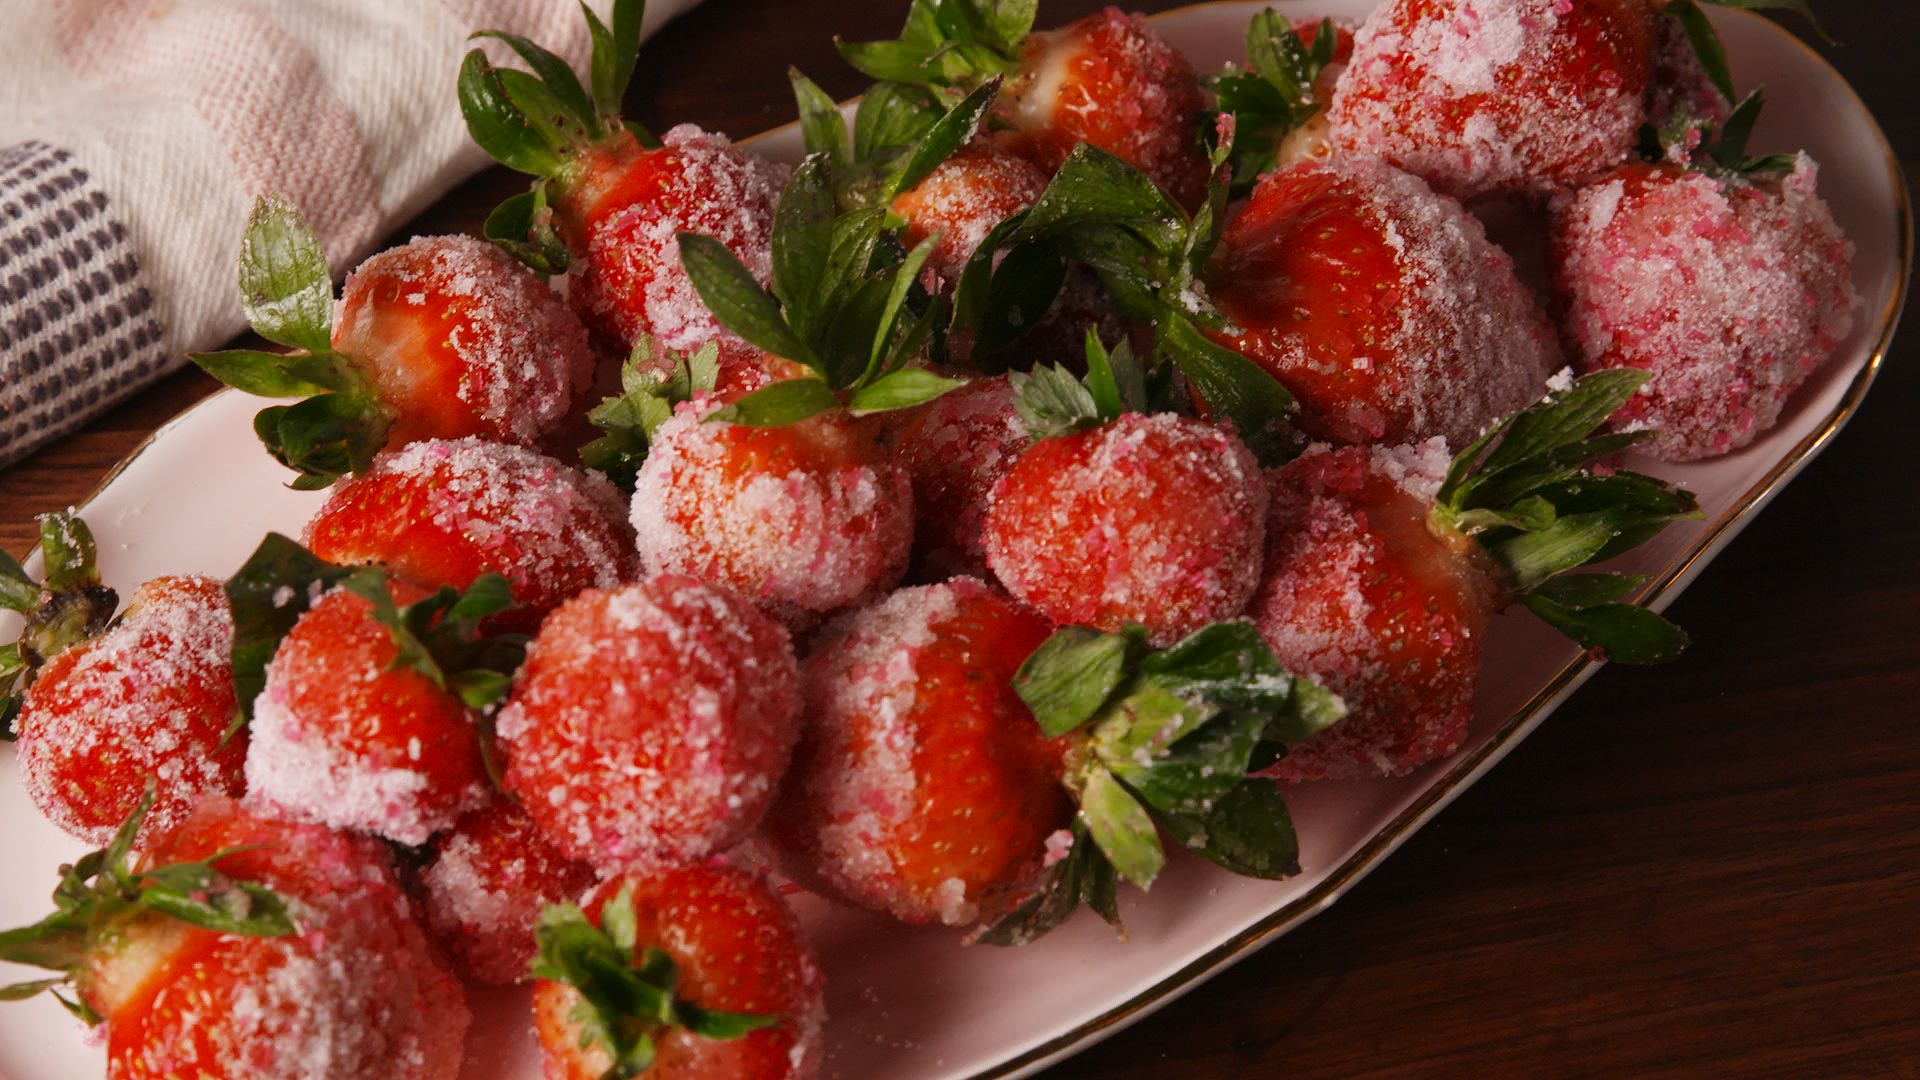 Best Moscato Strawberries Recipe - How to Make Moscato Strawberries